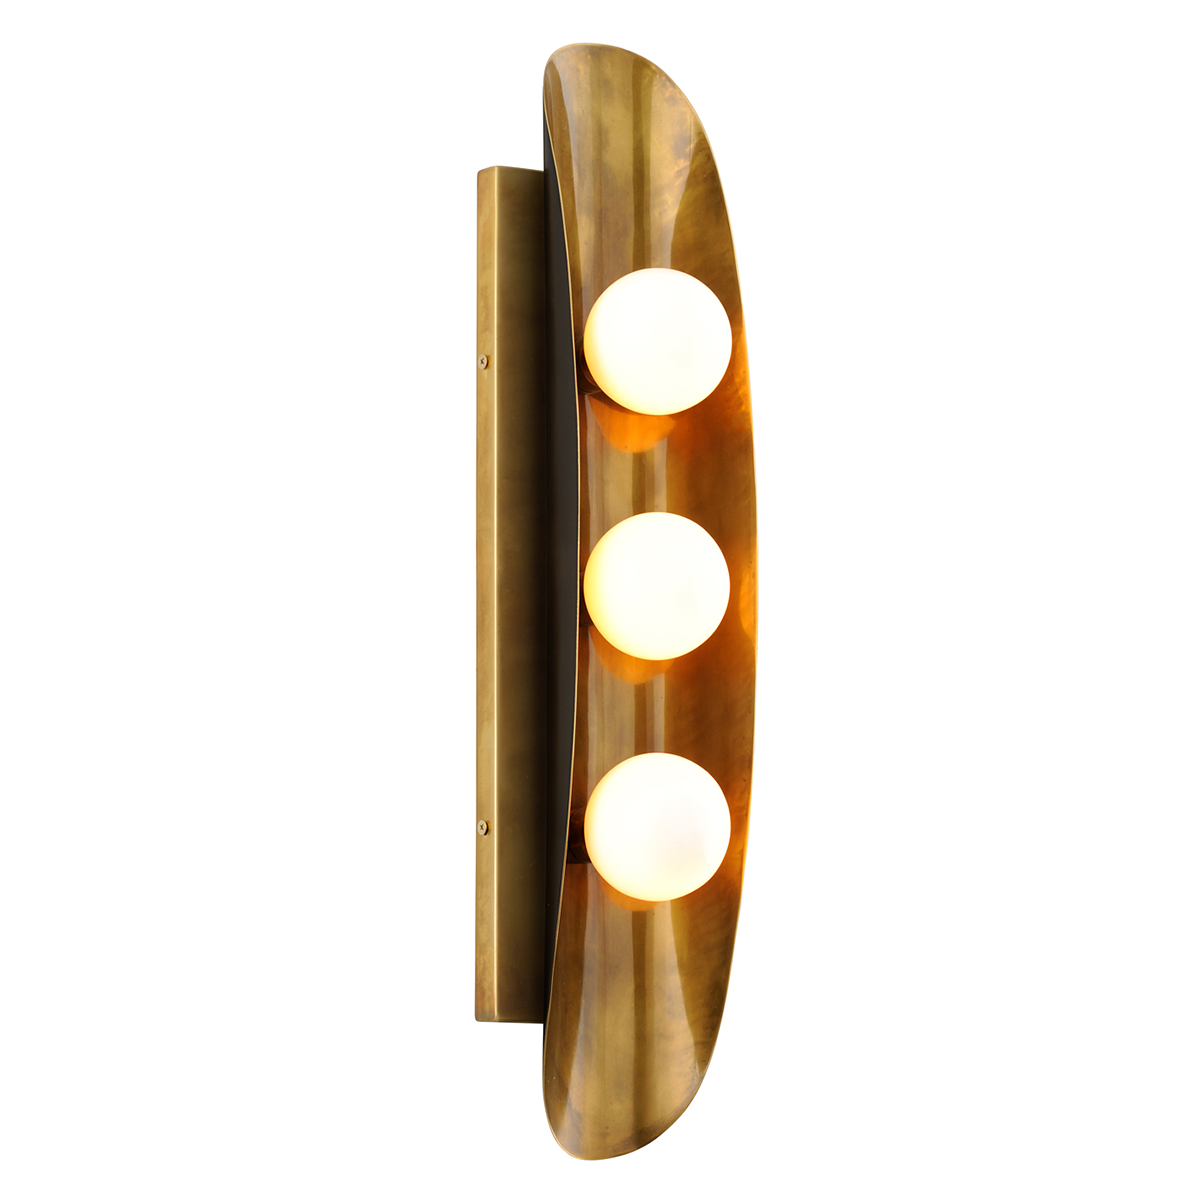 Hudson Valley Lighting Large Hopper Wall Sconce in Solid Brass